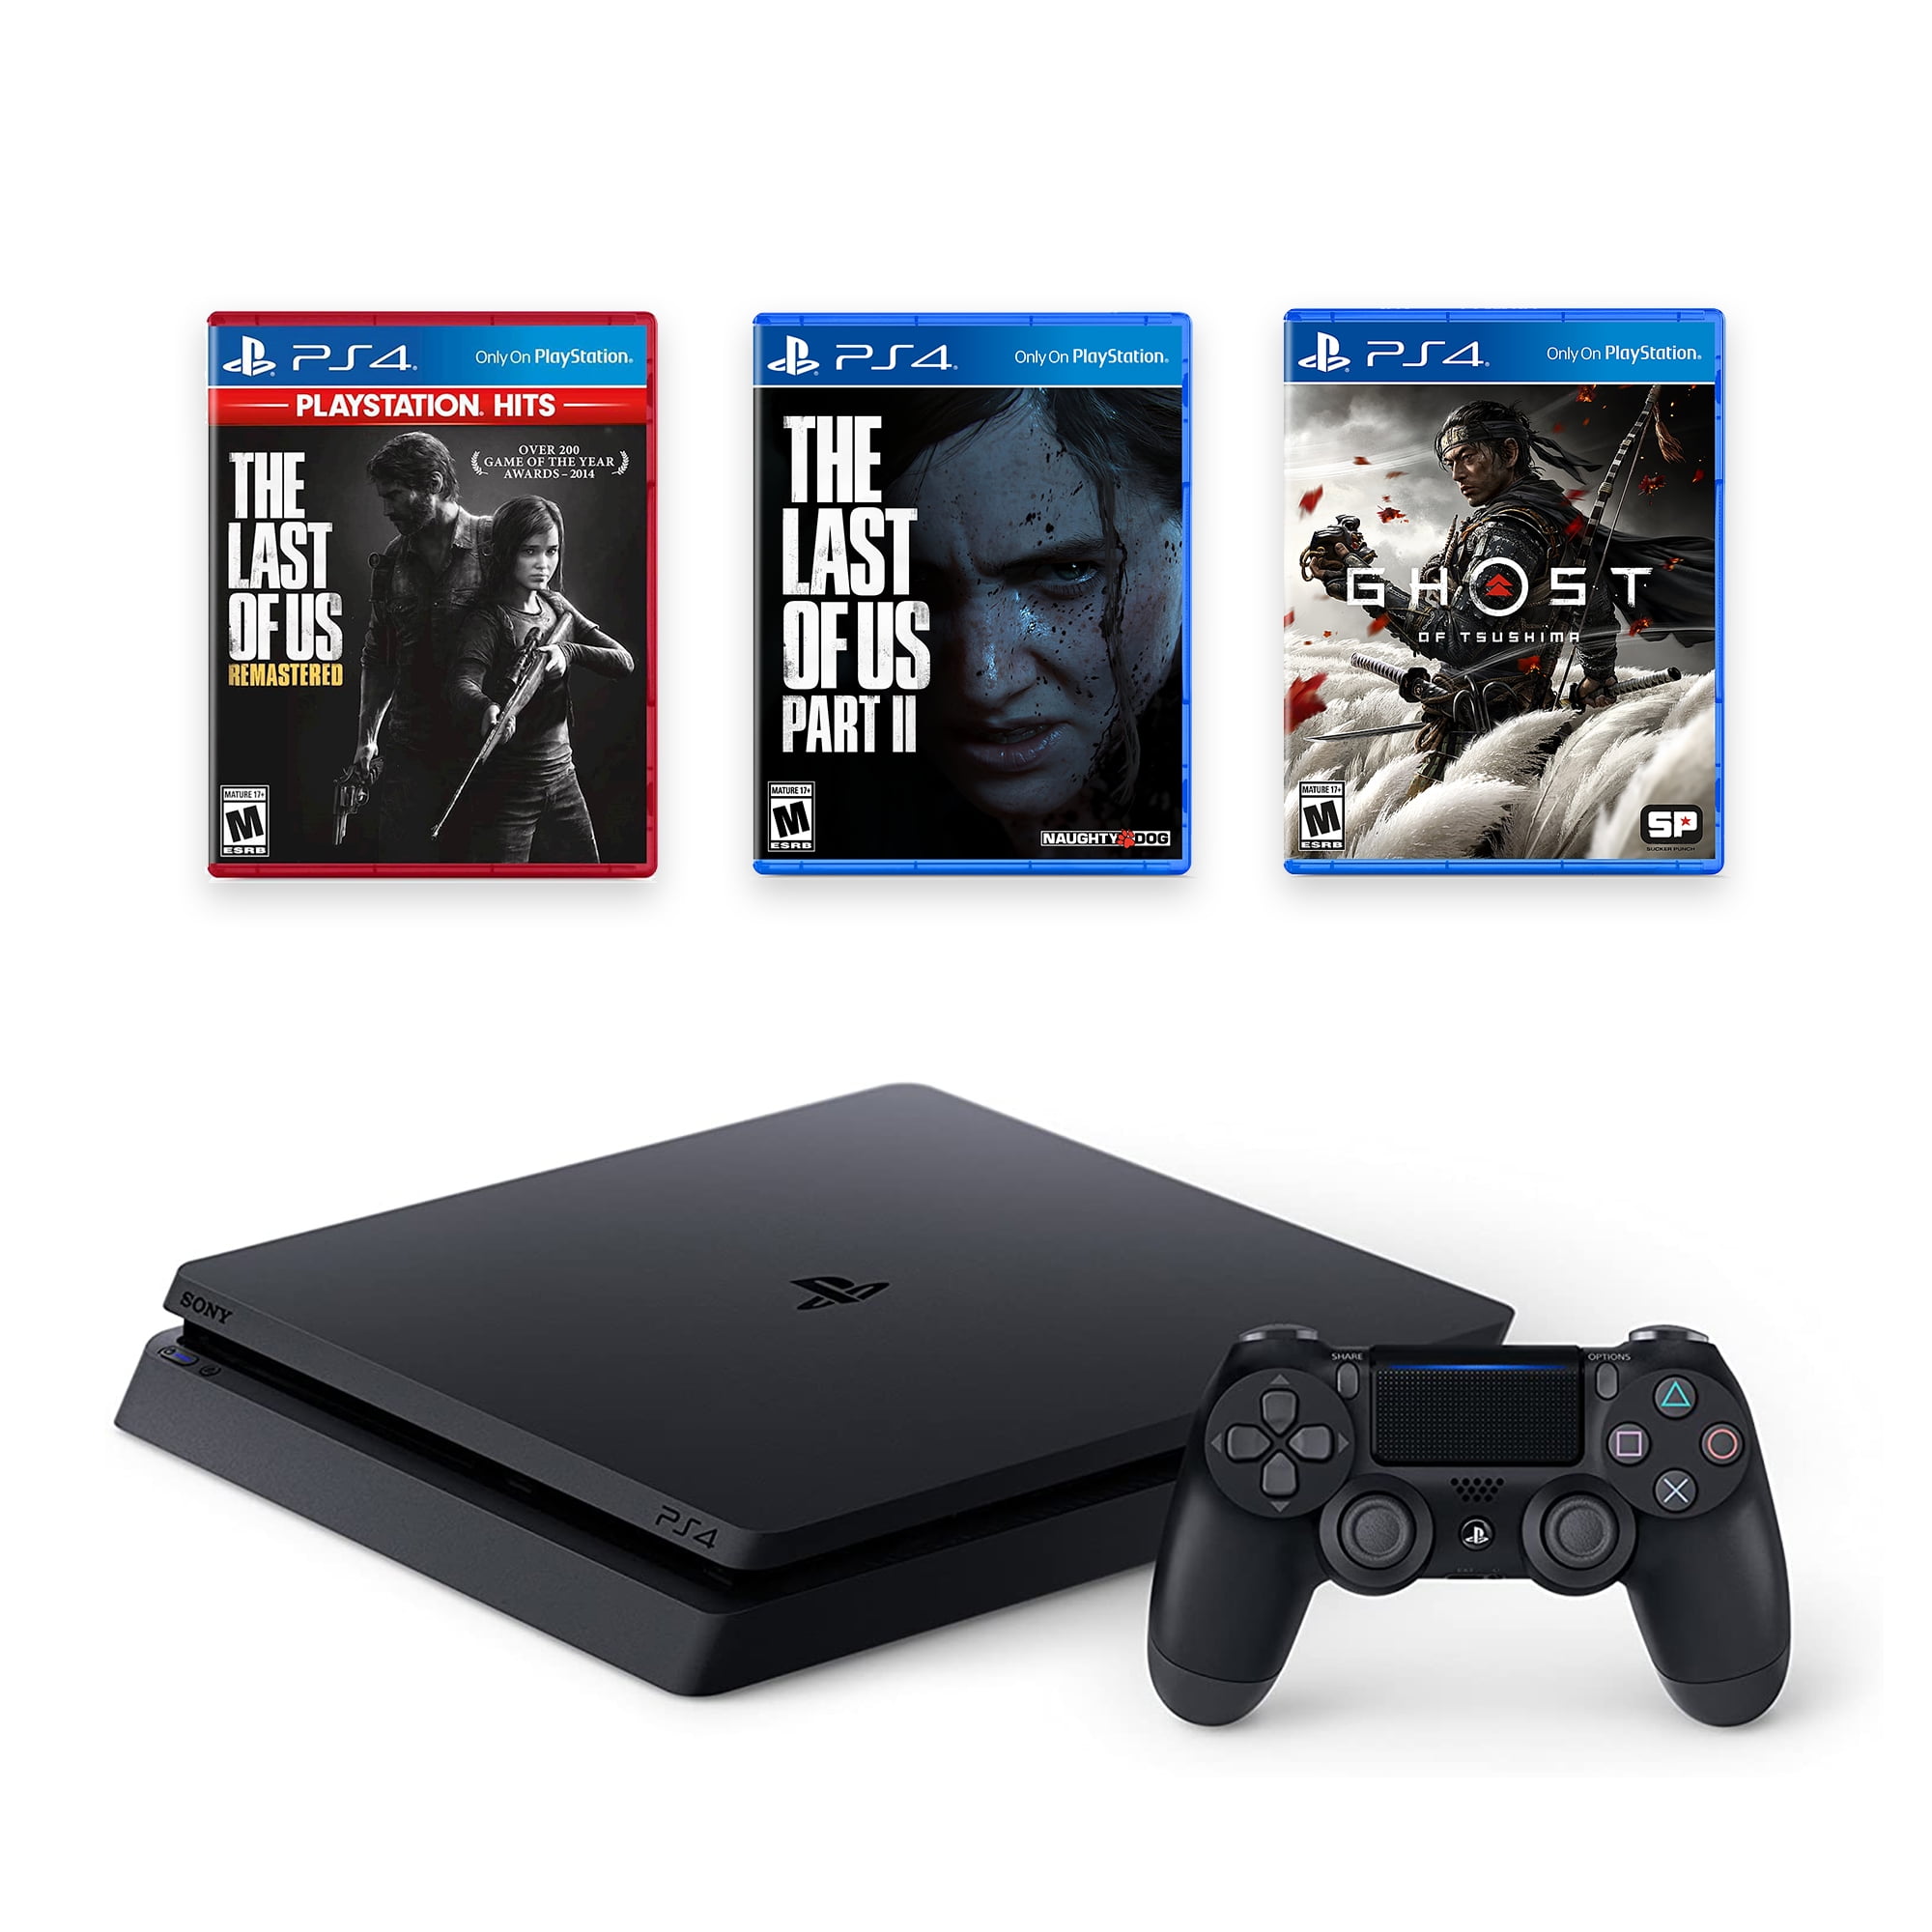 PlayStation 4 1TB Console with The Last of Us and Ghost of Tsushima